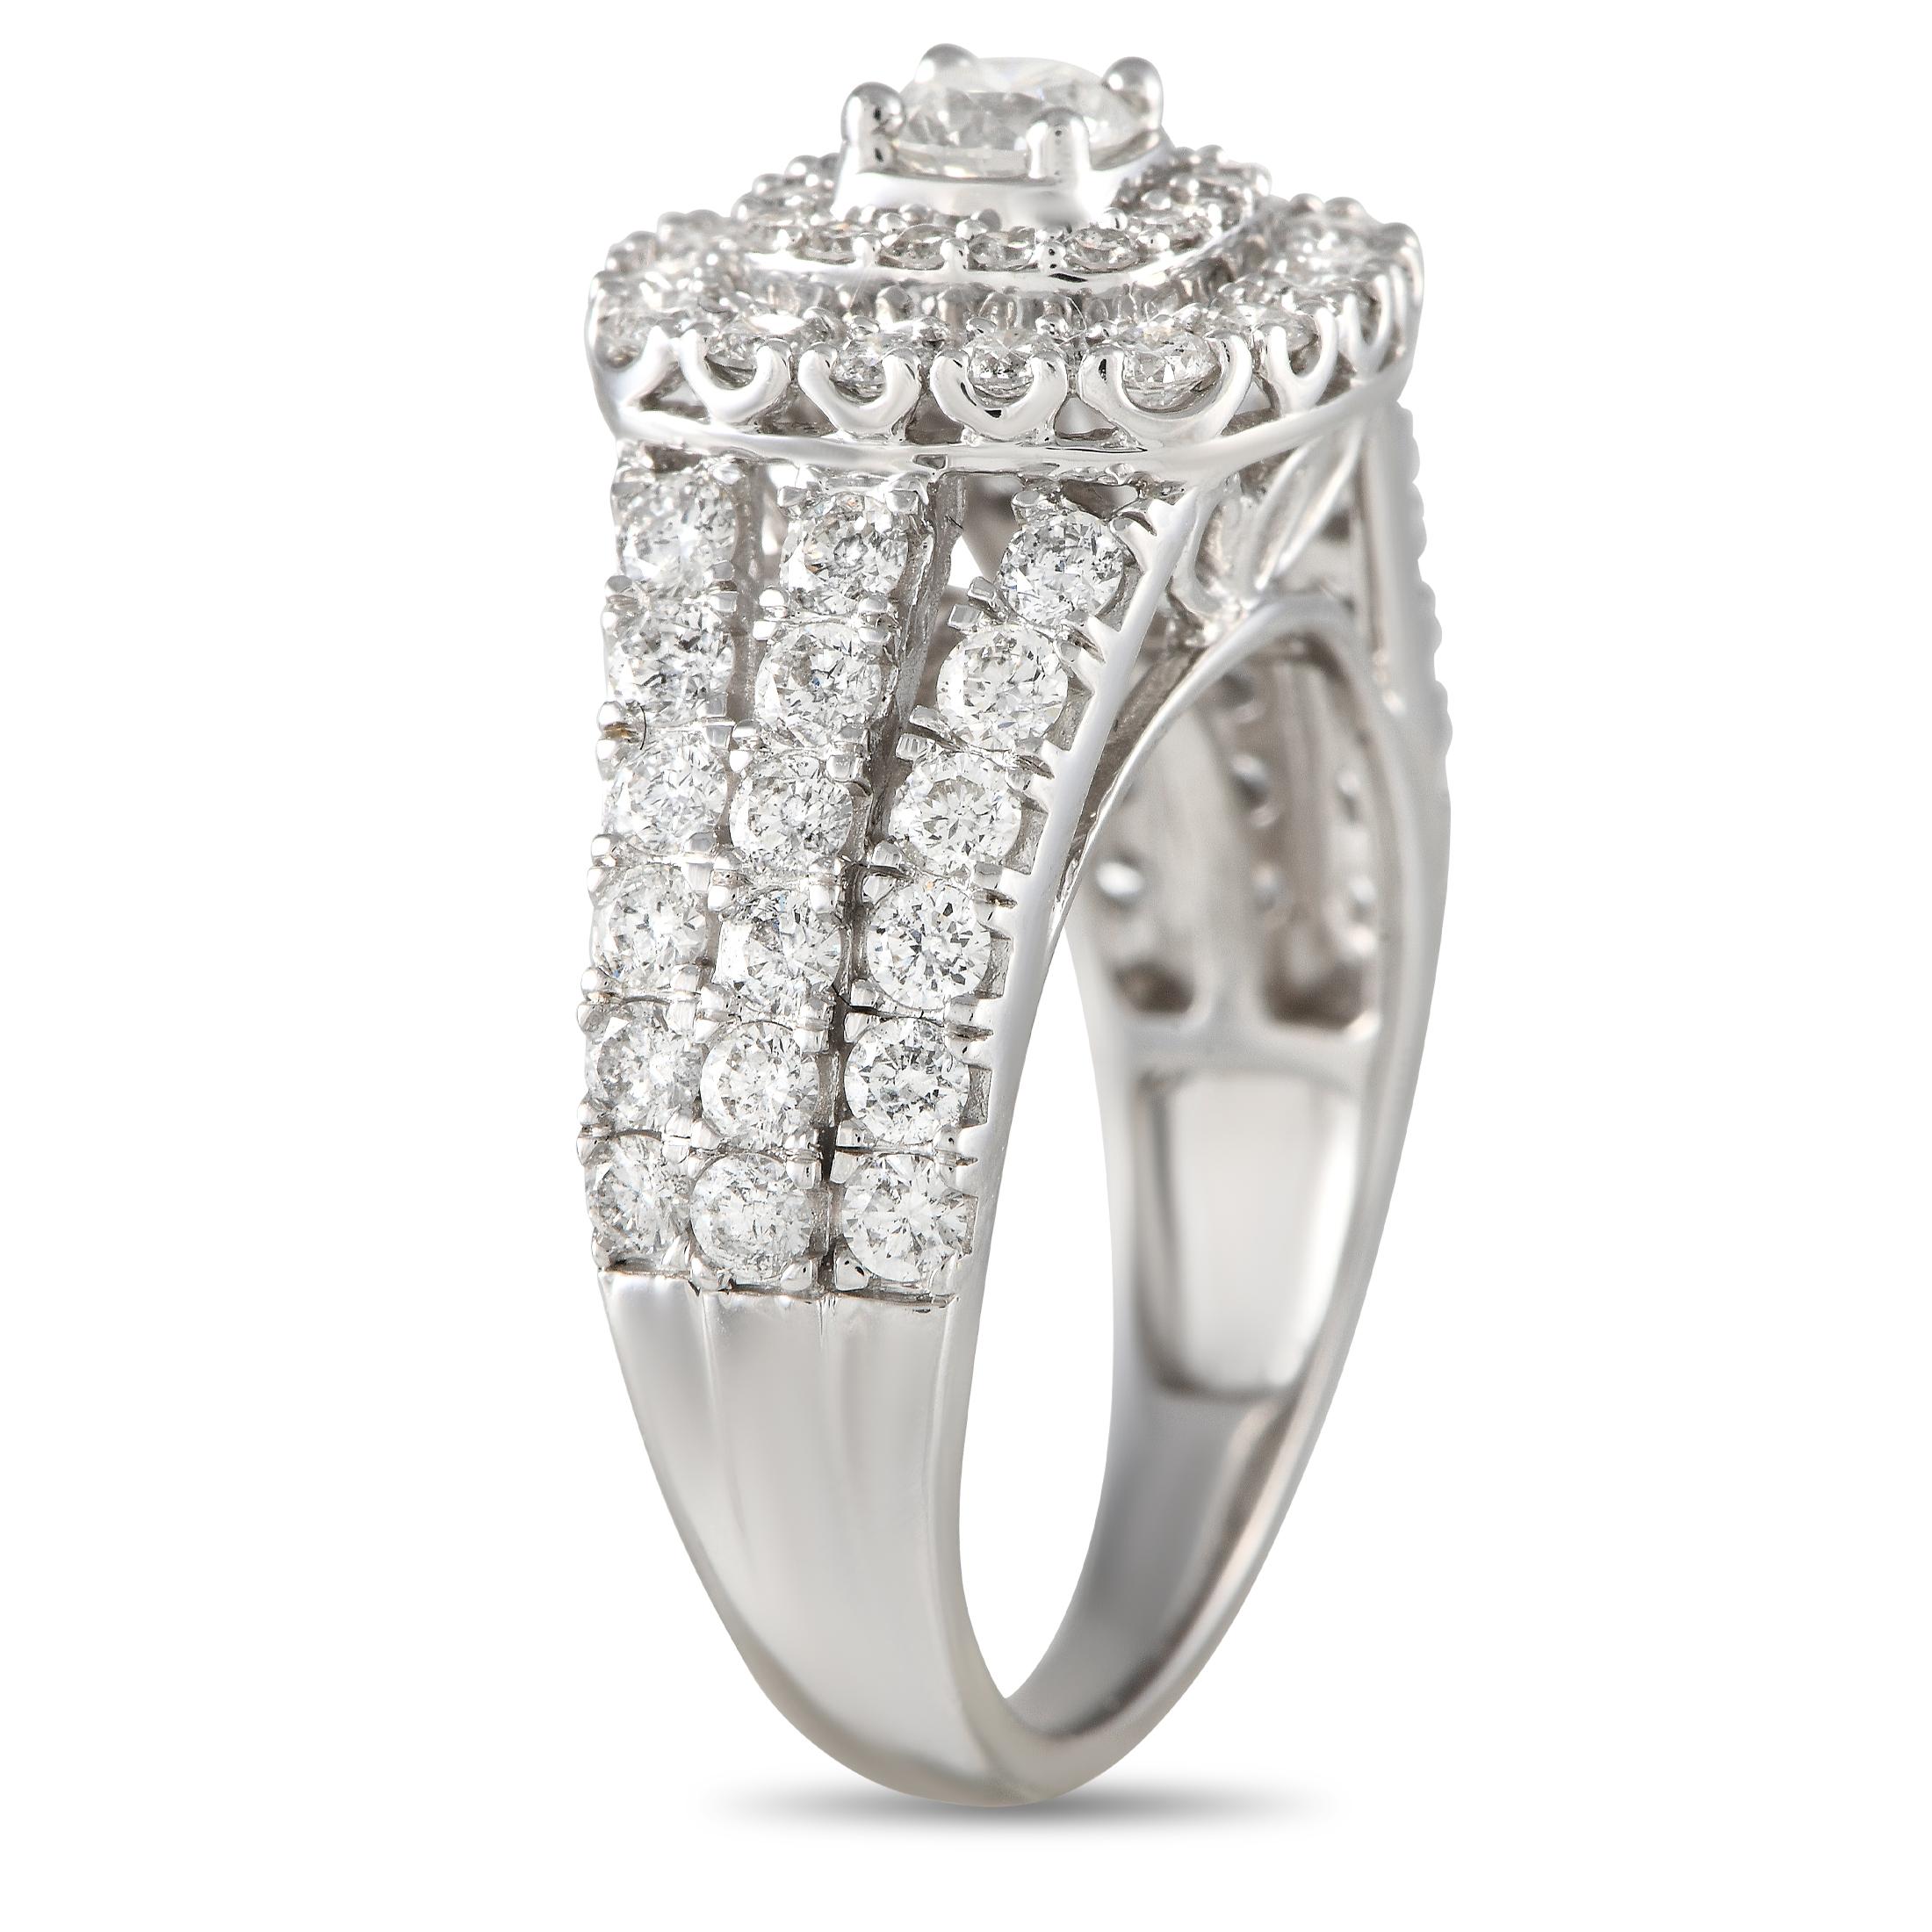 Vintage lovers will easily fall in love with this sparkler that looks like it belongs to another time period. This diamond ring in 14K white gold has a sparkling triple-split shank that tapers toward the back. Raised high above the band is a round